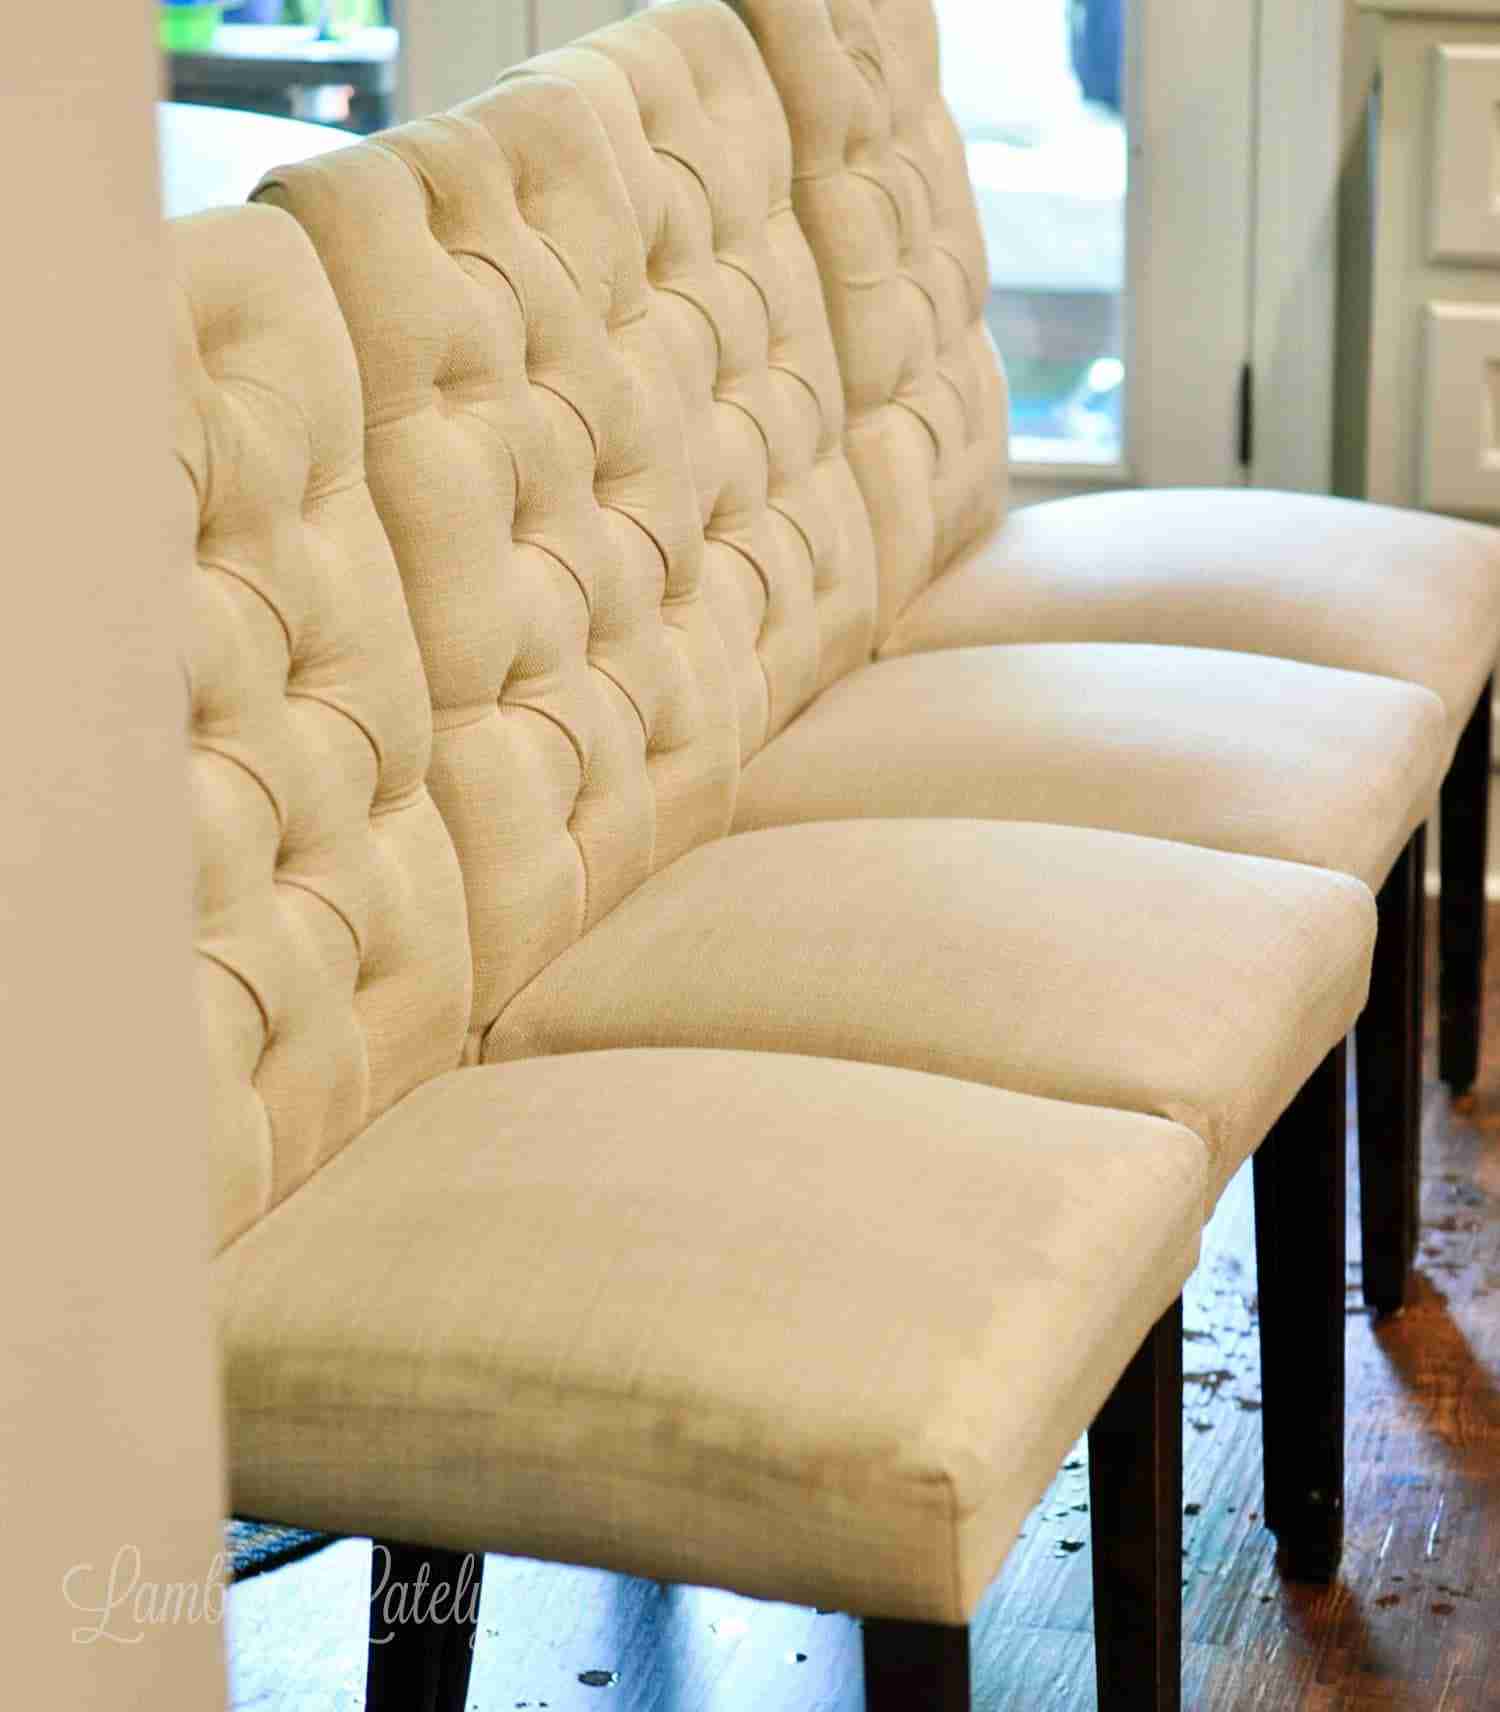 upholstered chairs lined in a row